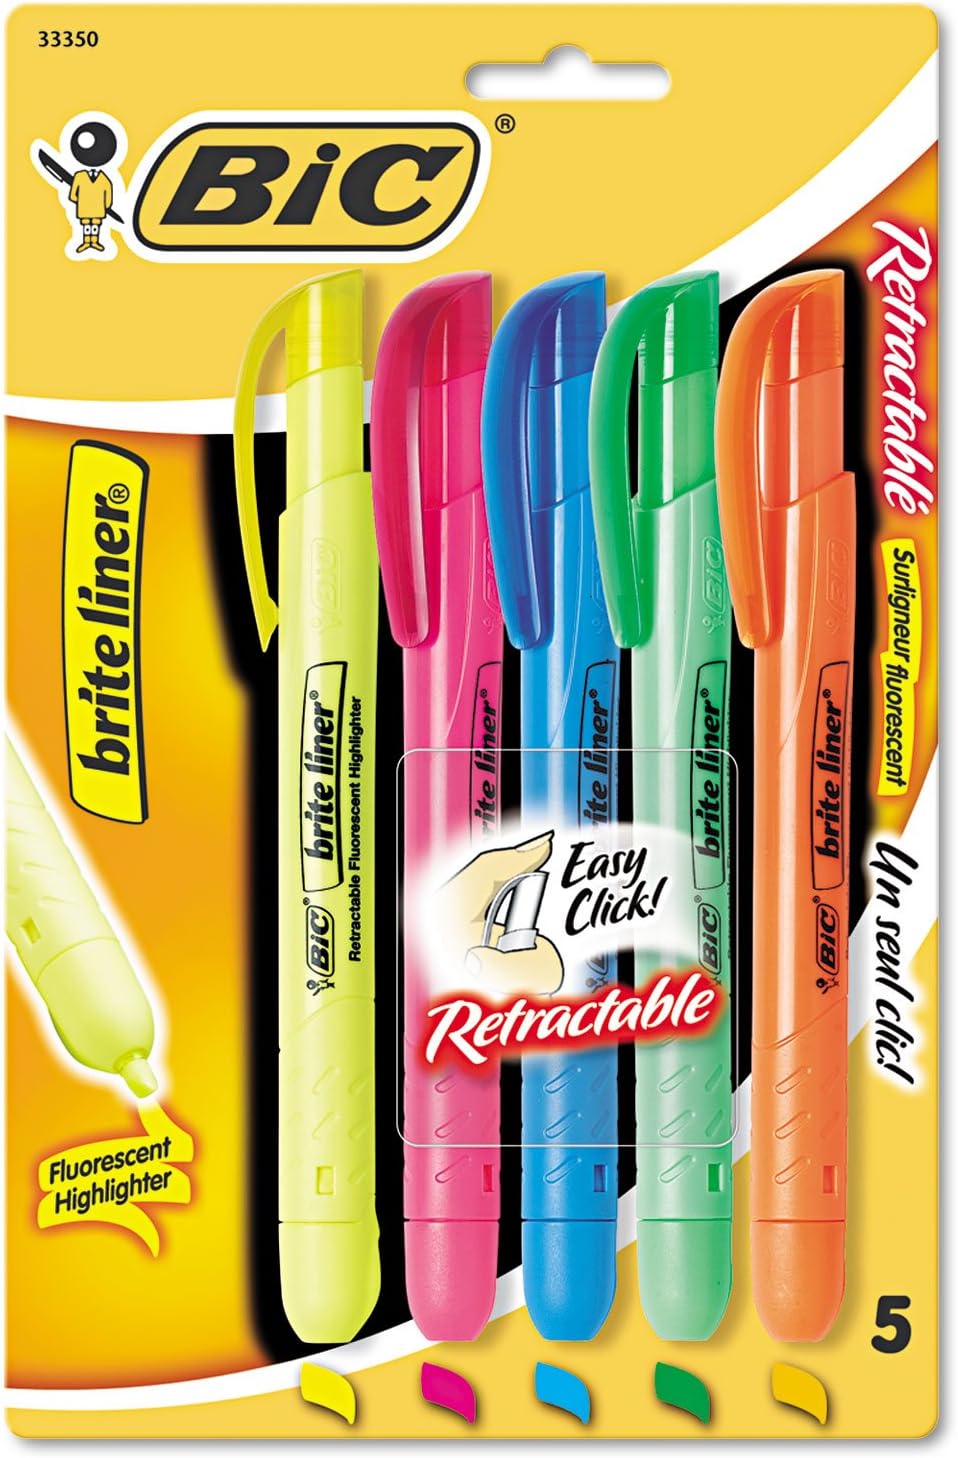 BIC+Brite+Liner+Retractable+Highlighter%2c+Chisel+Tip%2c+Assorted+Colors%2c+5-Count